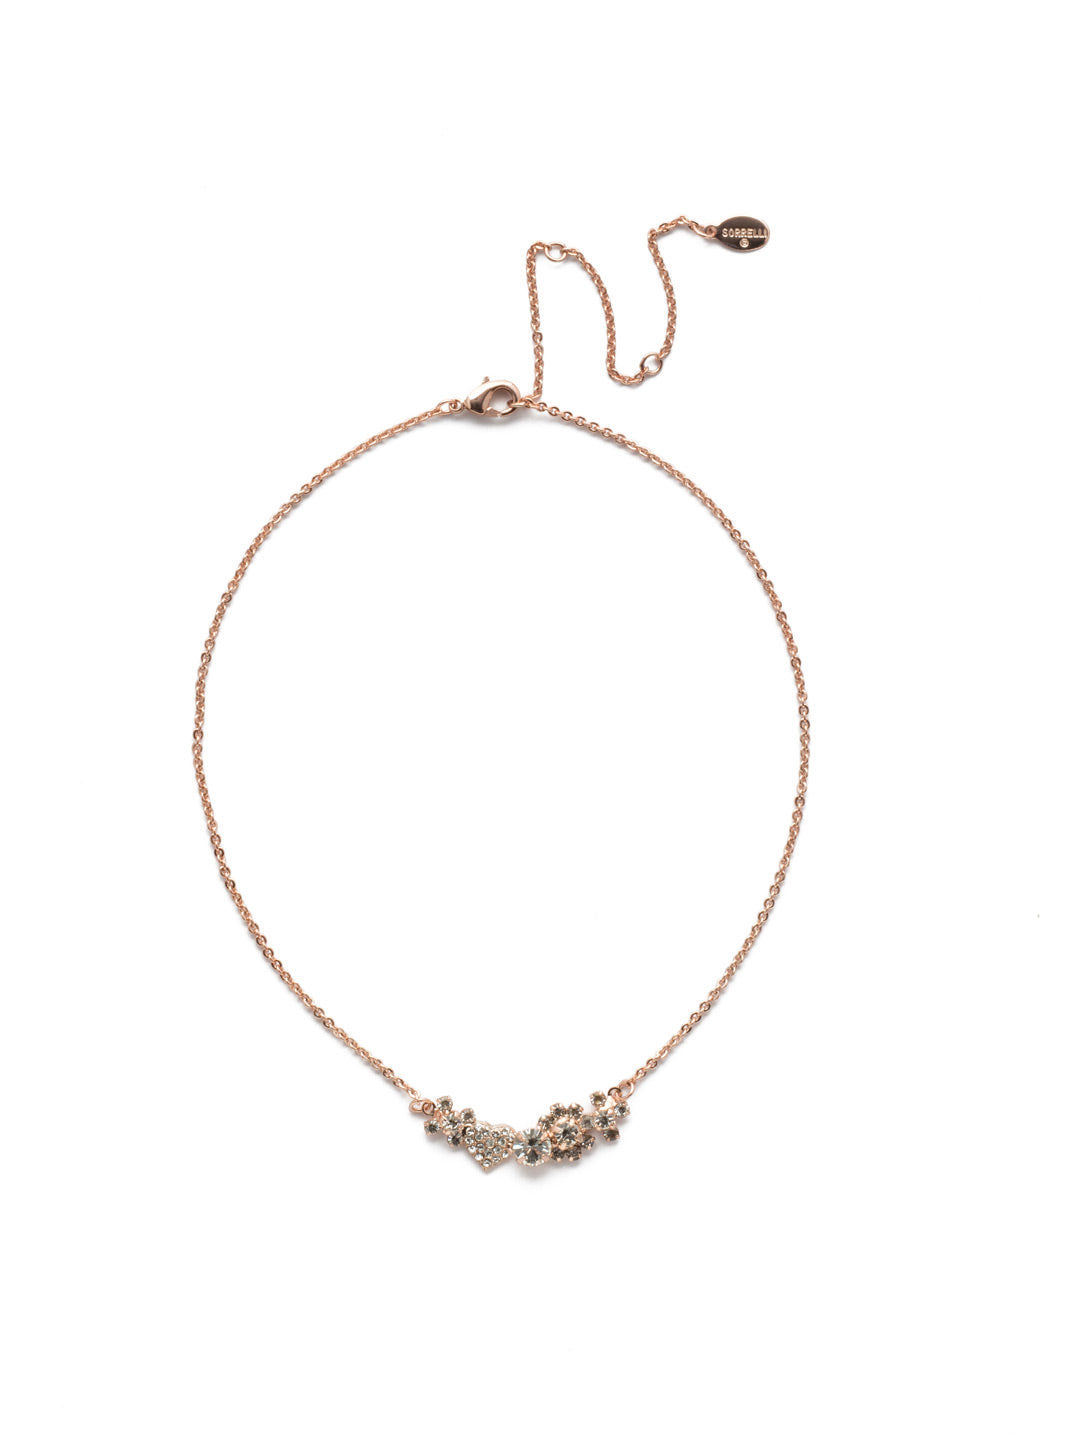 Karita Tennis Necklace - NEM8RGCRY - <p>Hearts, flowers, sparkling jewels - you have it all covered when you put on this beauty. From Sorrelli's Crystal collection in our Rose Gold-tone finish.</p>